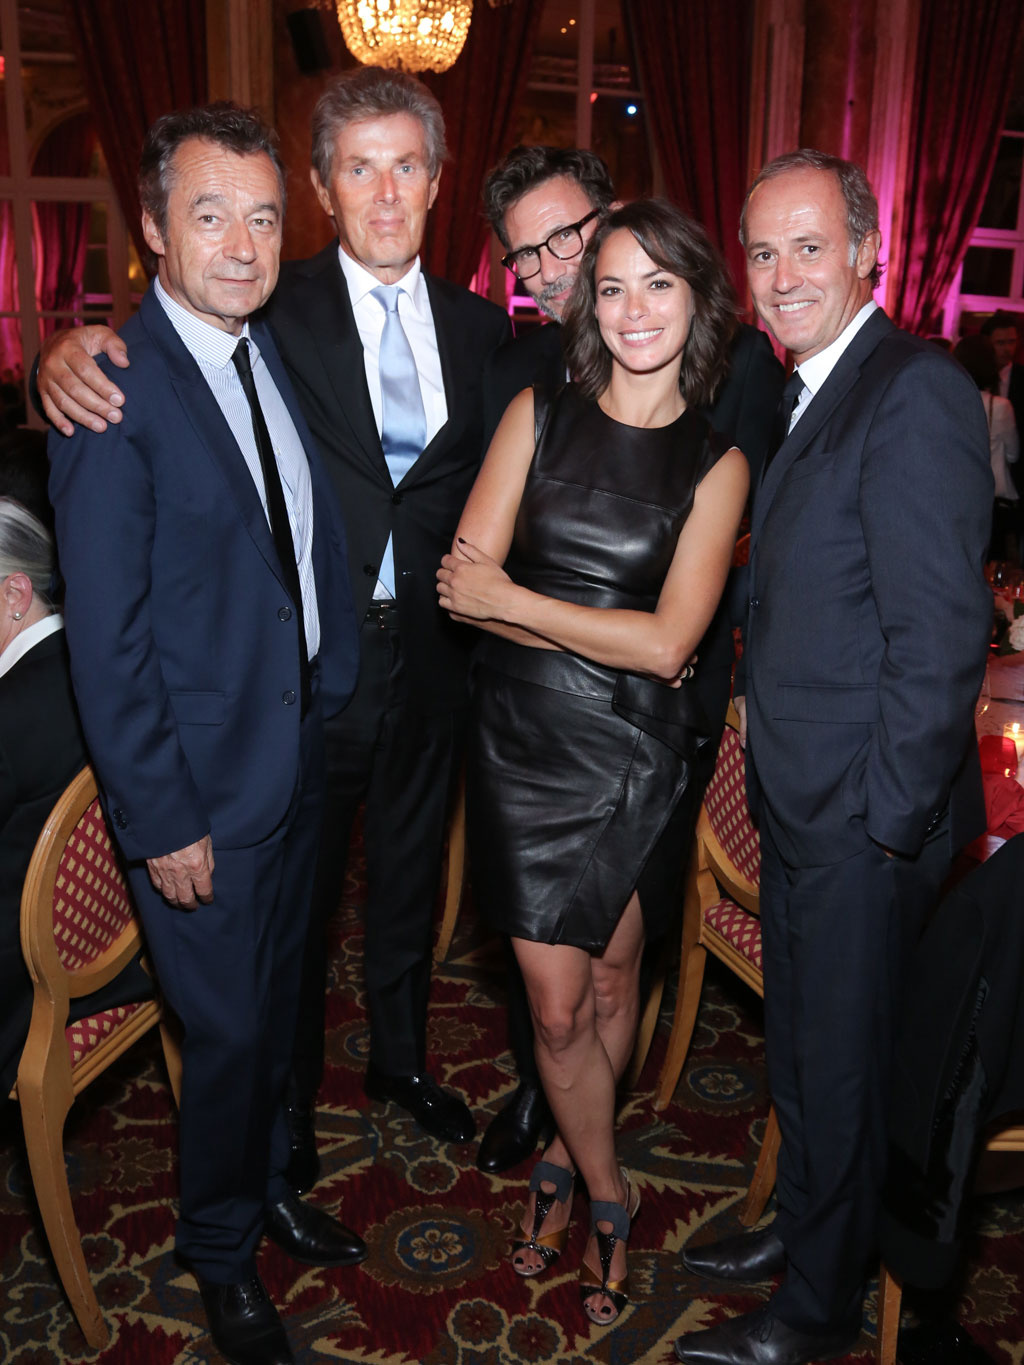 Berenice Bejo attended the opening ceremony of the 40th Annual Deauville American Film Festival